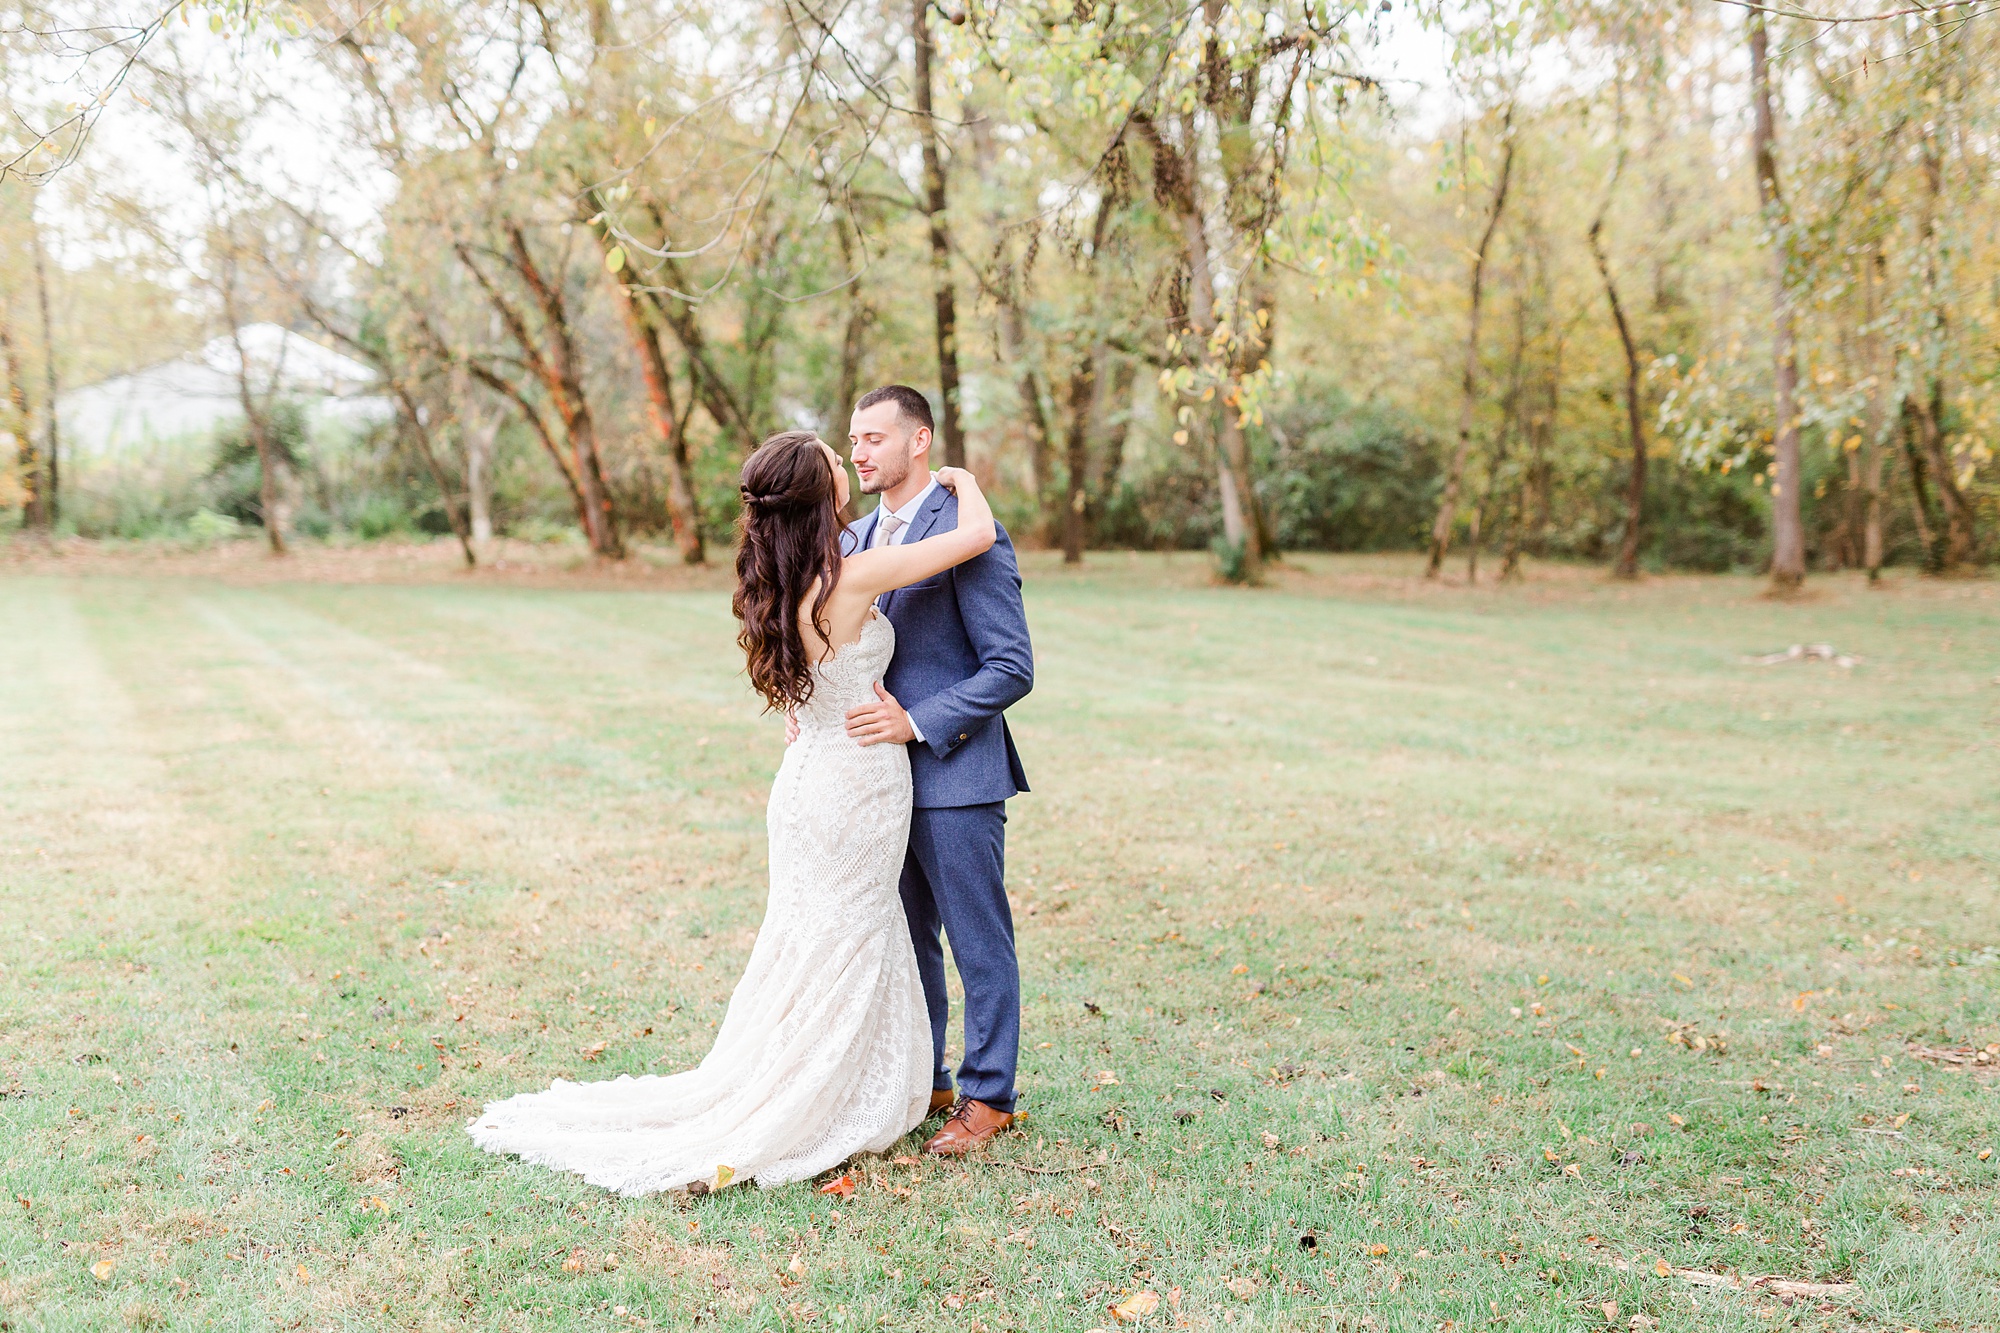 romantic fall wedding day first look